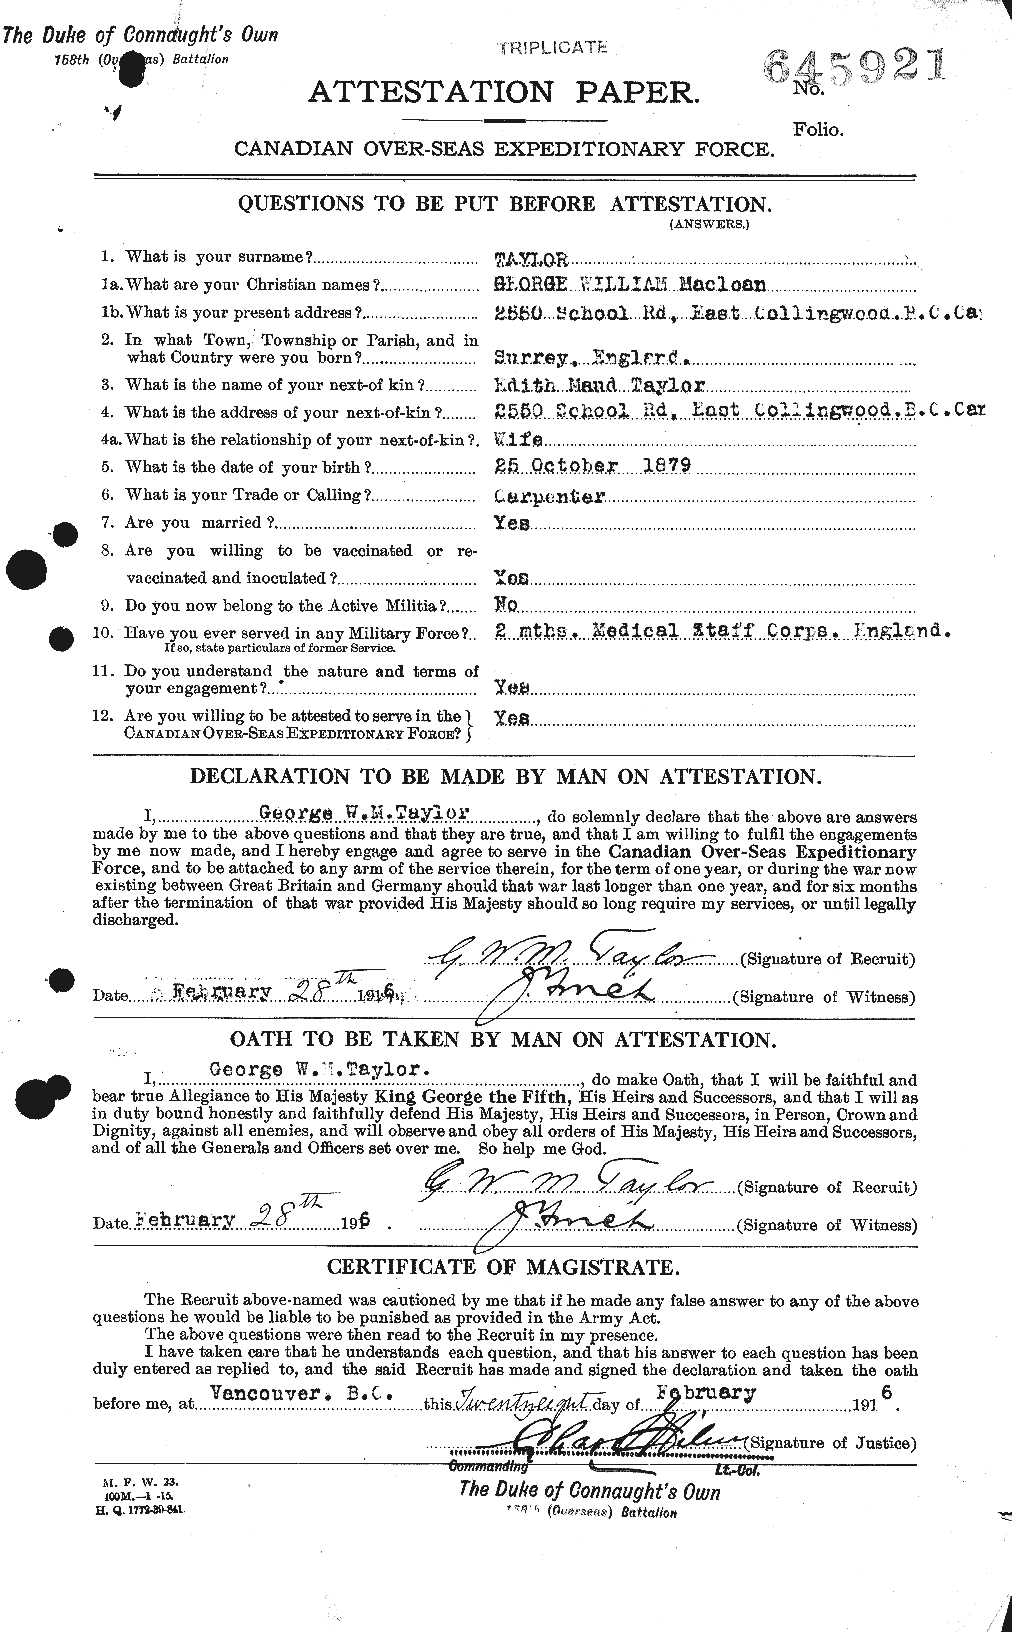 Personnel Records of the First World War - CEF 626372a